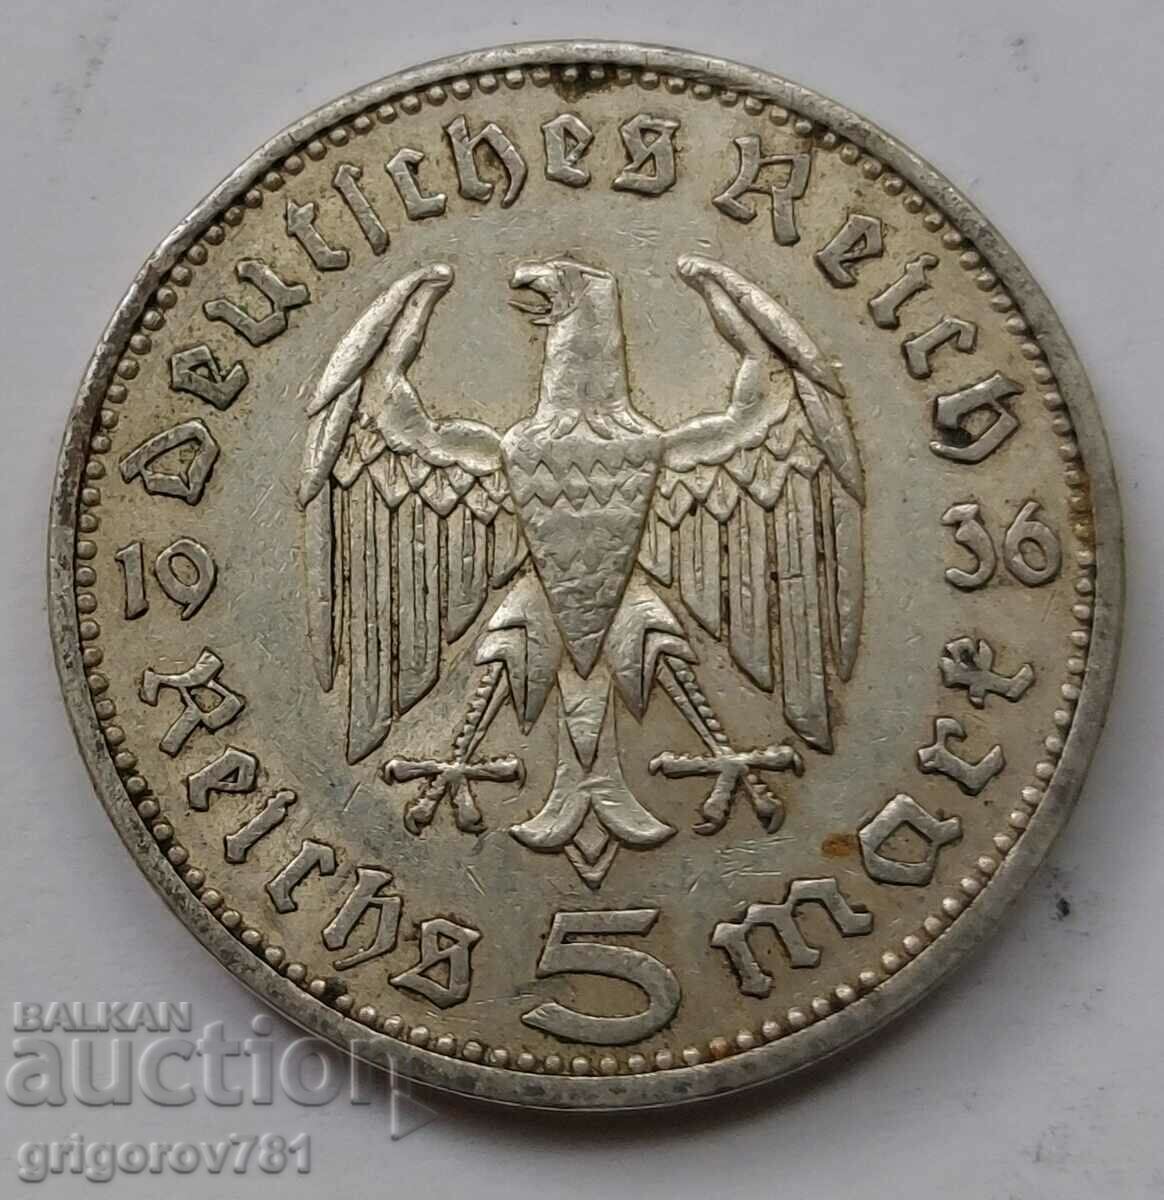 5 Mark Silver Germany 1936 A III Reich Silver Coin #40